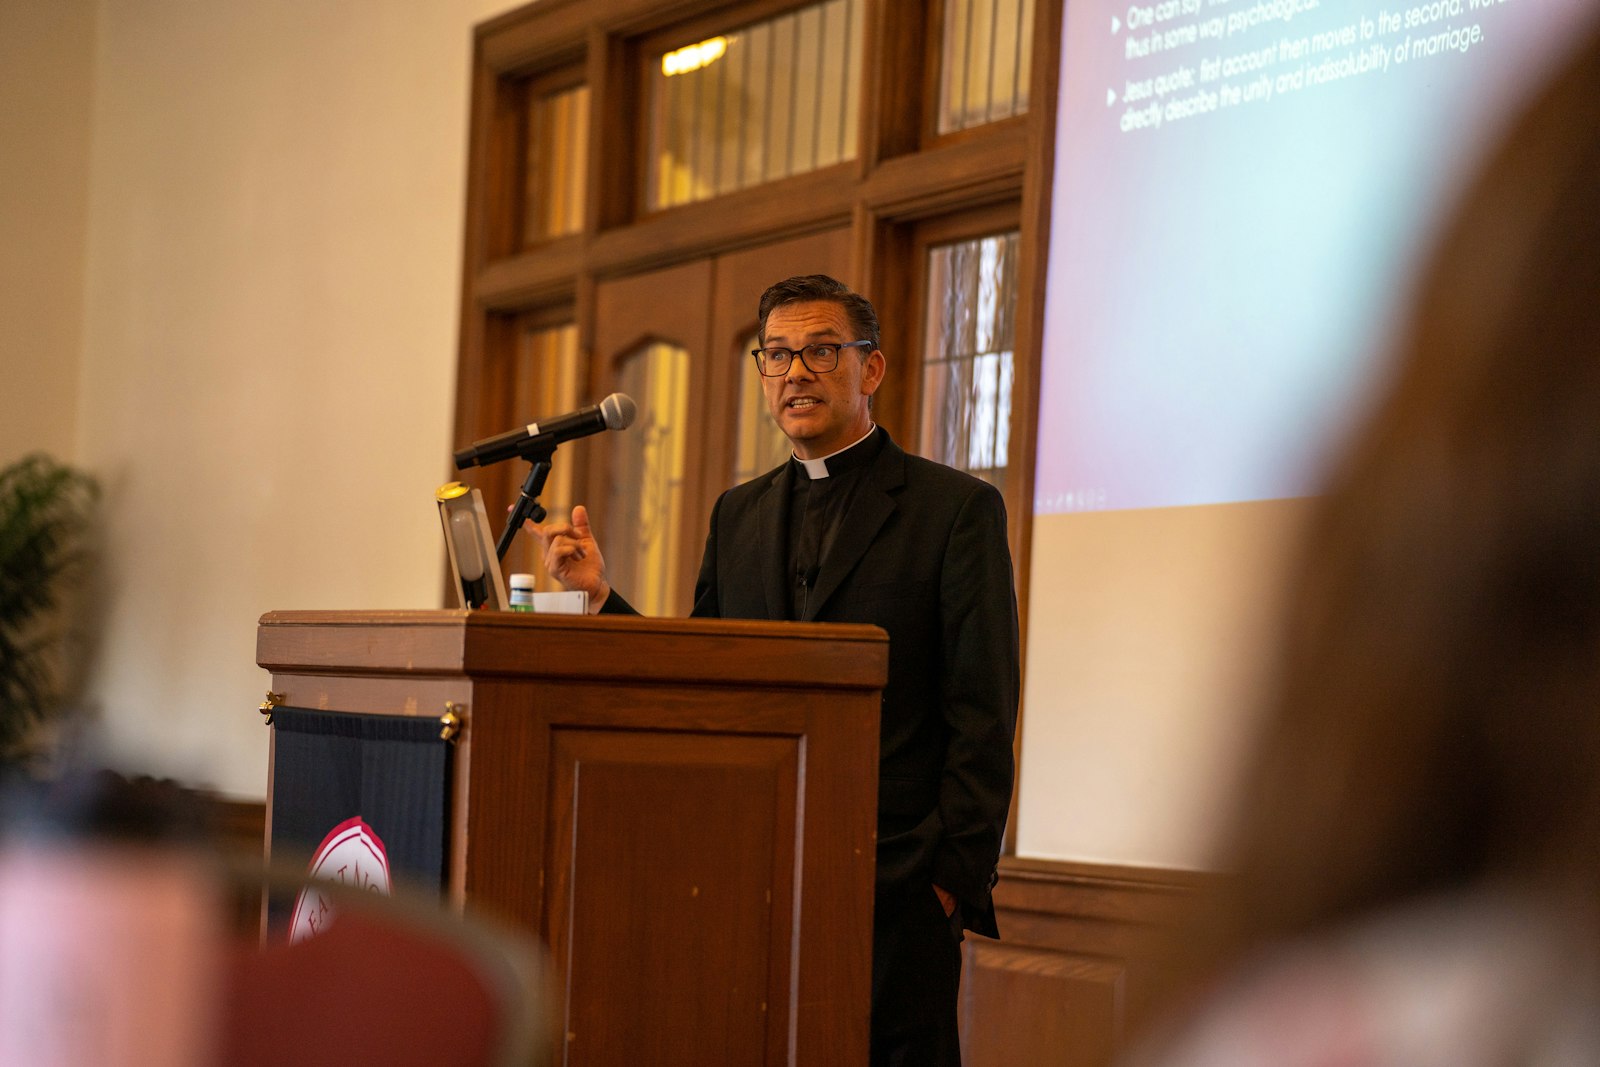 Fr. Sean Kilcawley spoke to the administrators about Pope St. John Paul II’s Theology of the Body and how it could lead them and, subsequently, their staff and students toward a better understanding of what it means to be created in the image of God. (Valaurian Waller | Detroit Catholic)